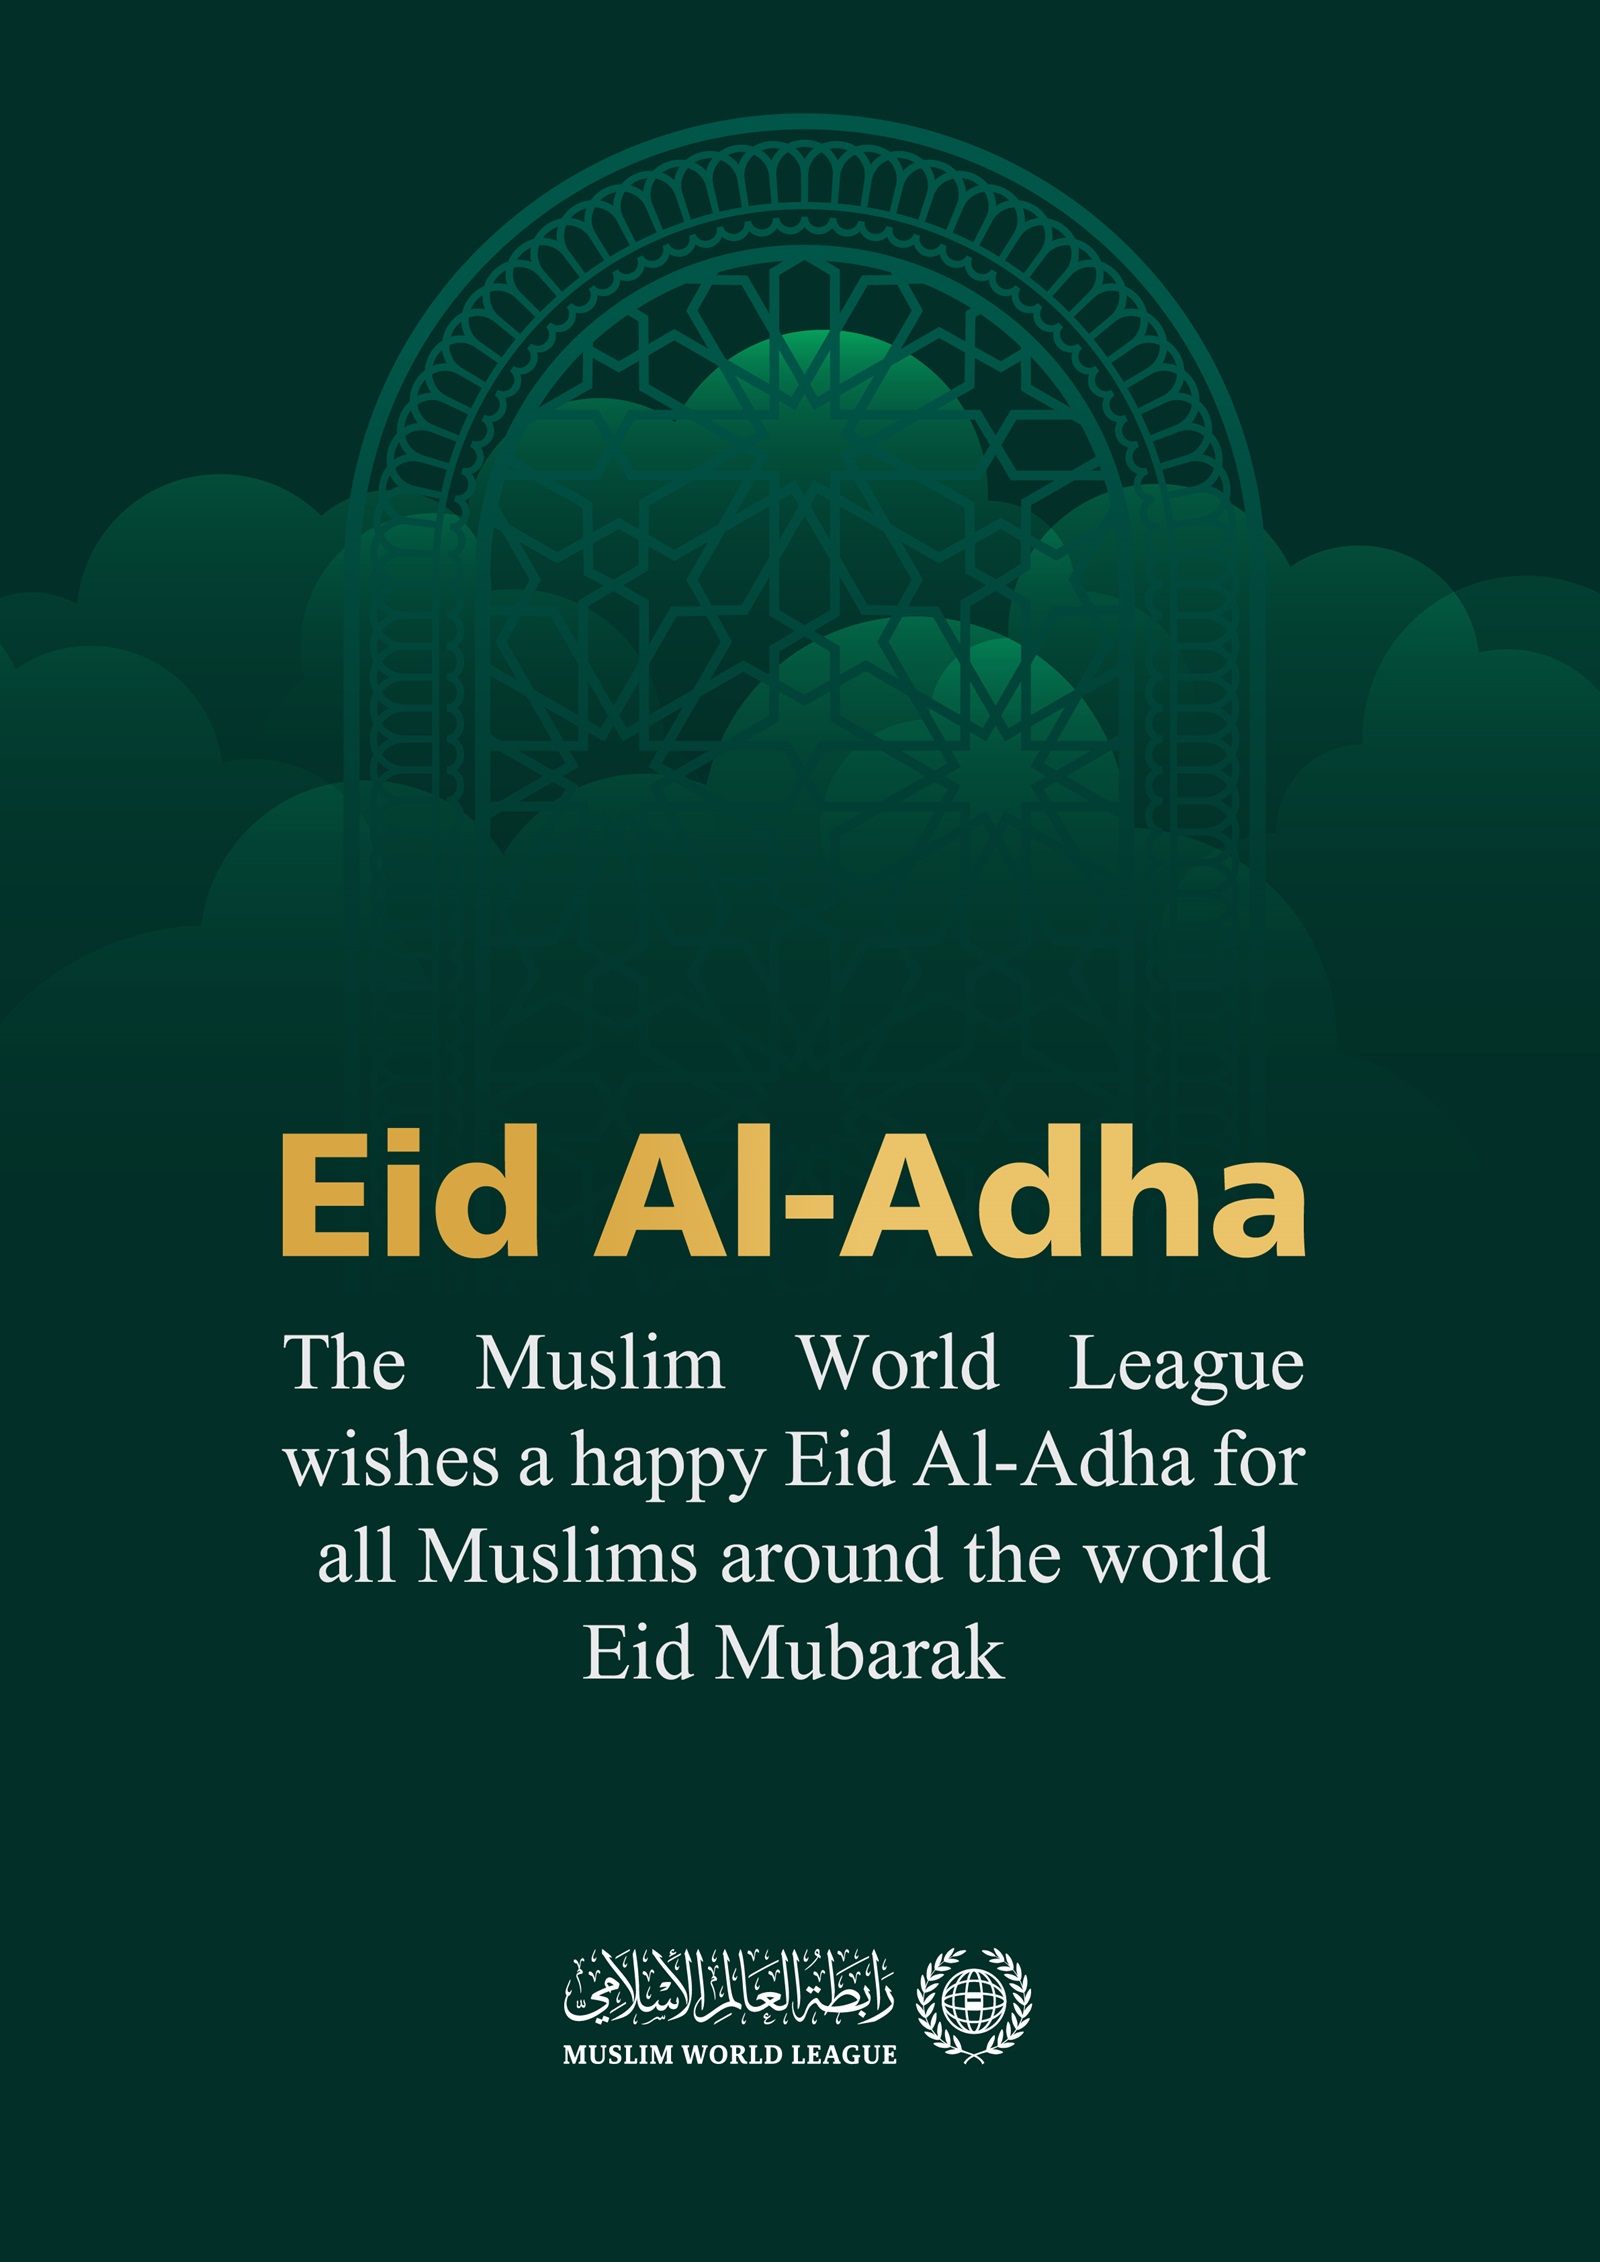 The Muslim World League wishes a happy Eid AlAdha for all Muslims around the world. Eid Mubarak; May Allah make it a good and blessed Eid for all.